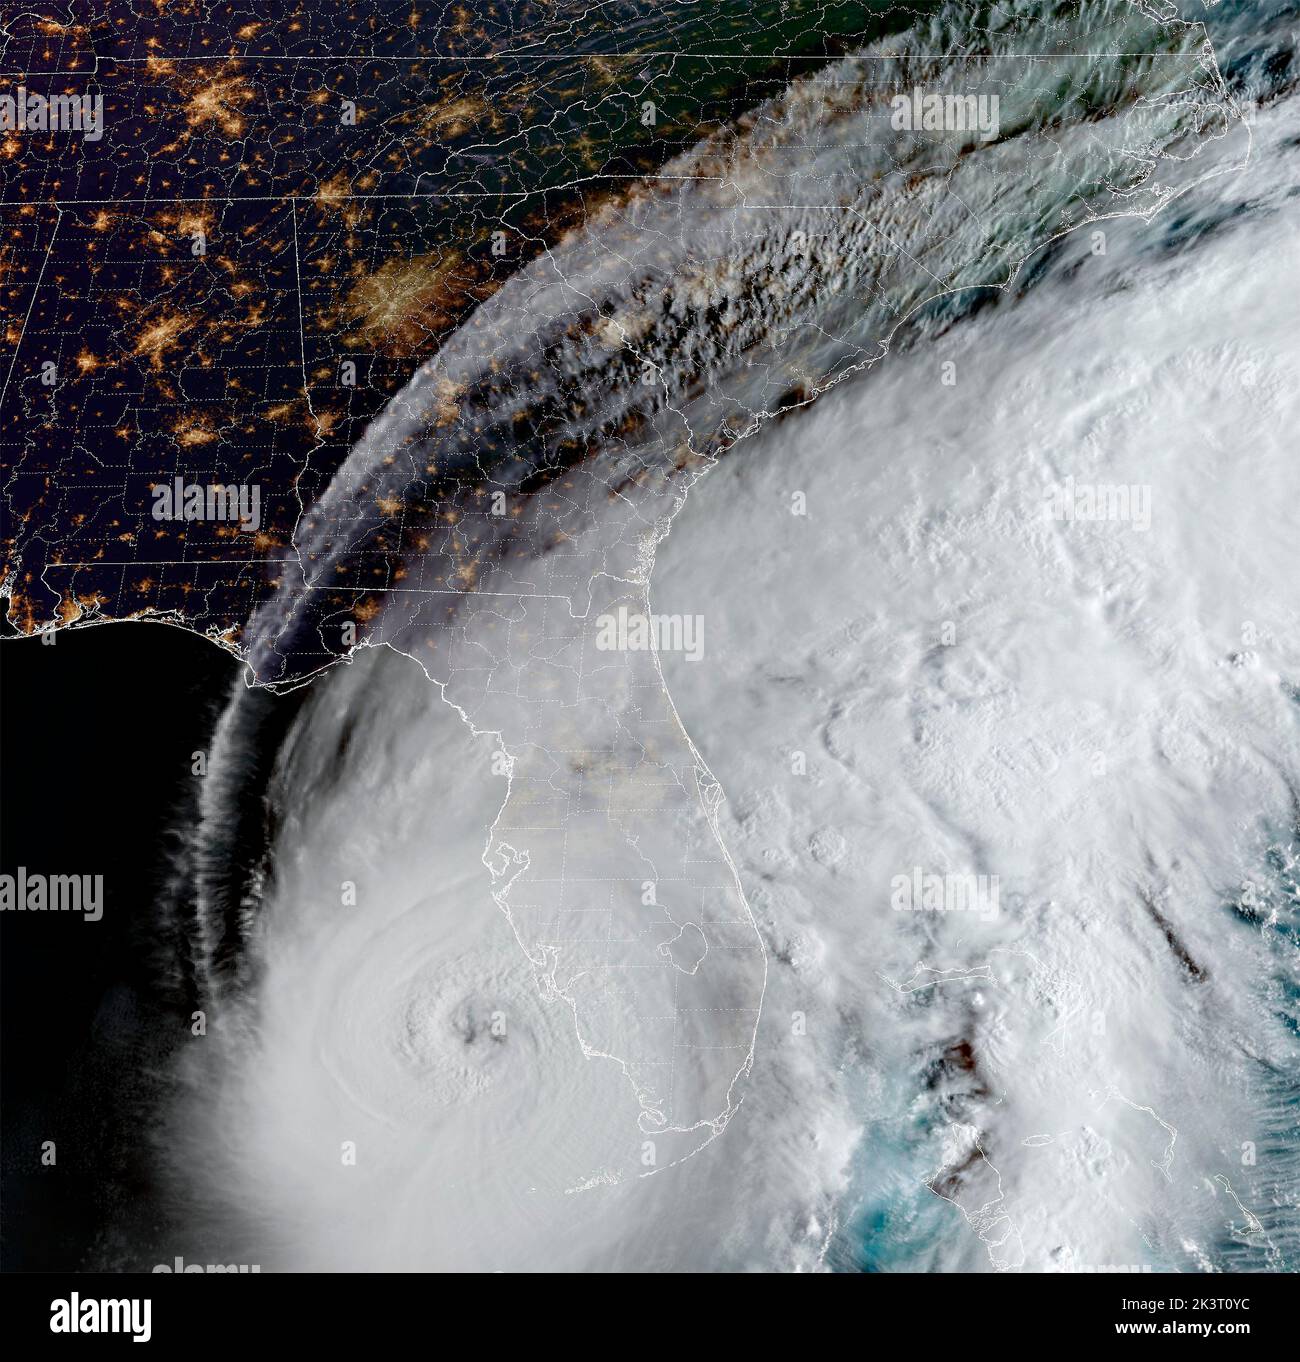 Modis Noaa, Earth Orbit. 28th Sep, 2022. MODIS NOAA, EARTH ORBIT. 28 September, 2022. Dawn view of Hurricane Ian as it moves closer to the west coast of Florida as a Category 4 dangerous storm fed by the warm waters of the Gulf of Mexico as seen from the GEOS NOAA satellite, September 28, 2022 in Earth Orbit. Credit: GEOS NOAA/NOAA/Alamy Live News Stock Photo